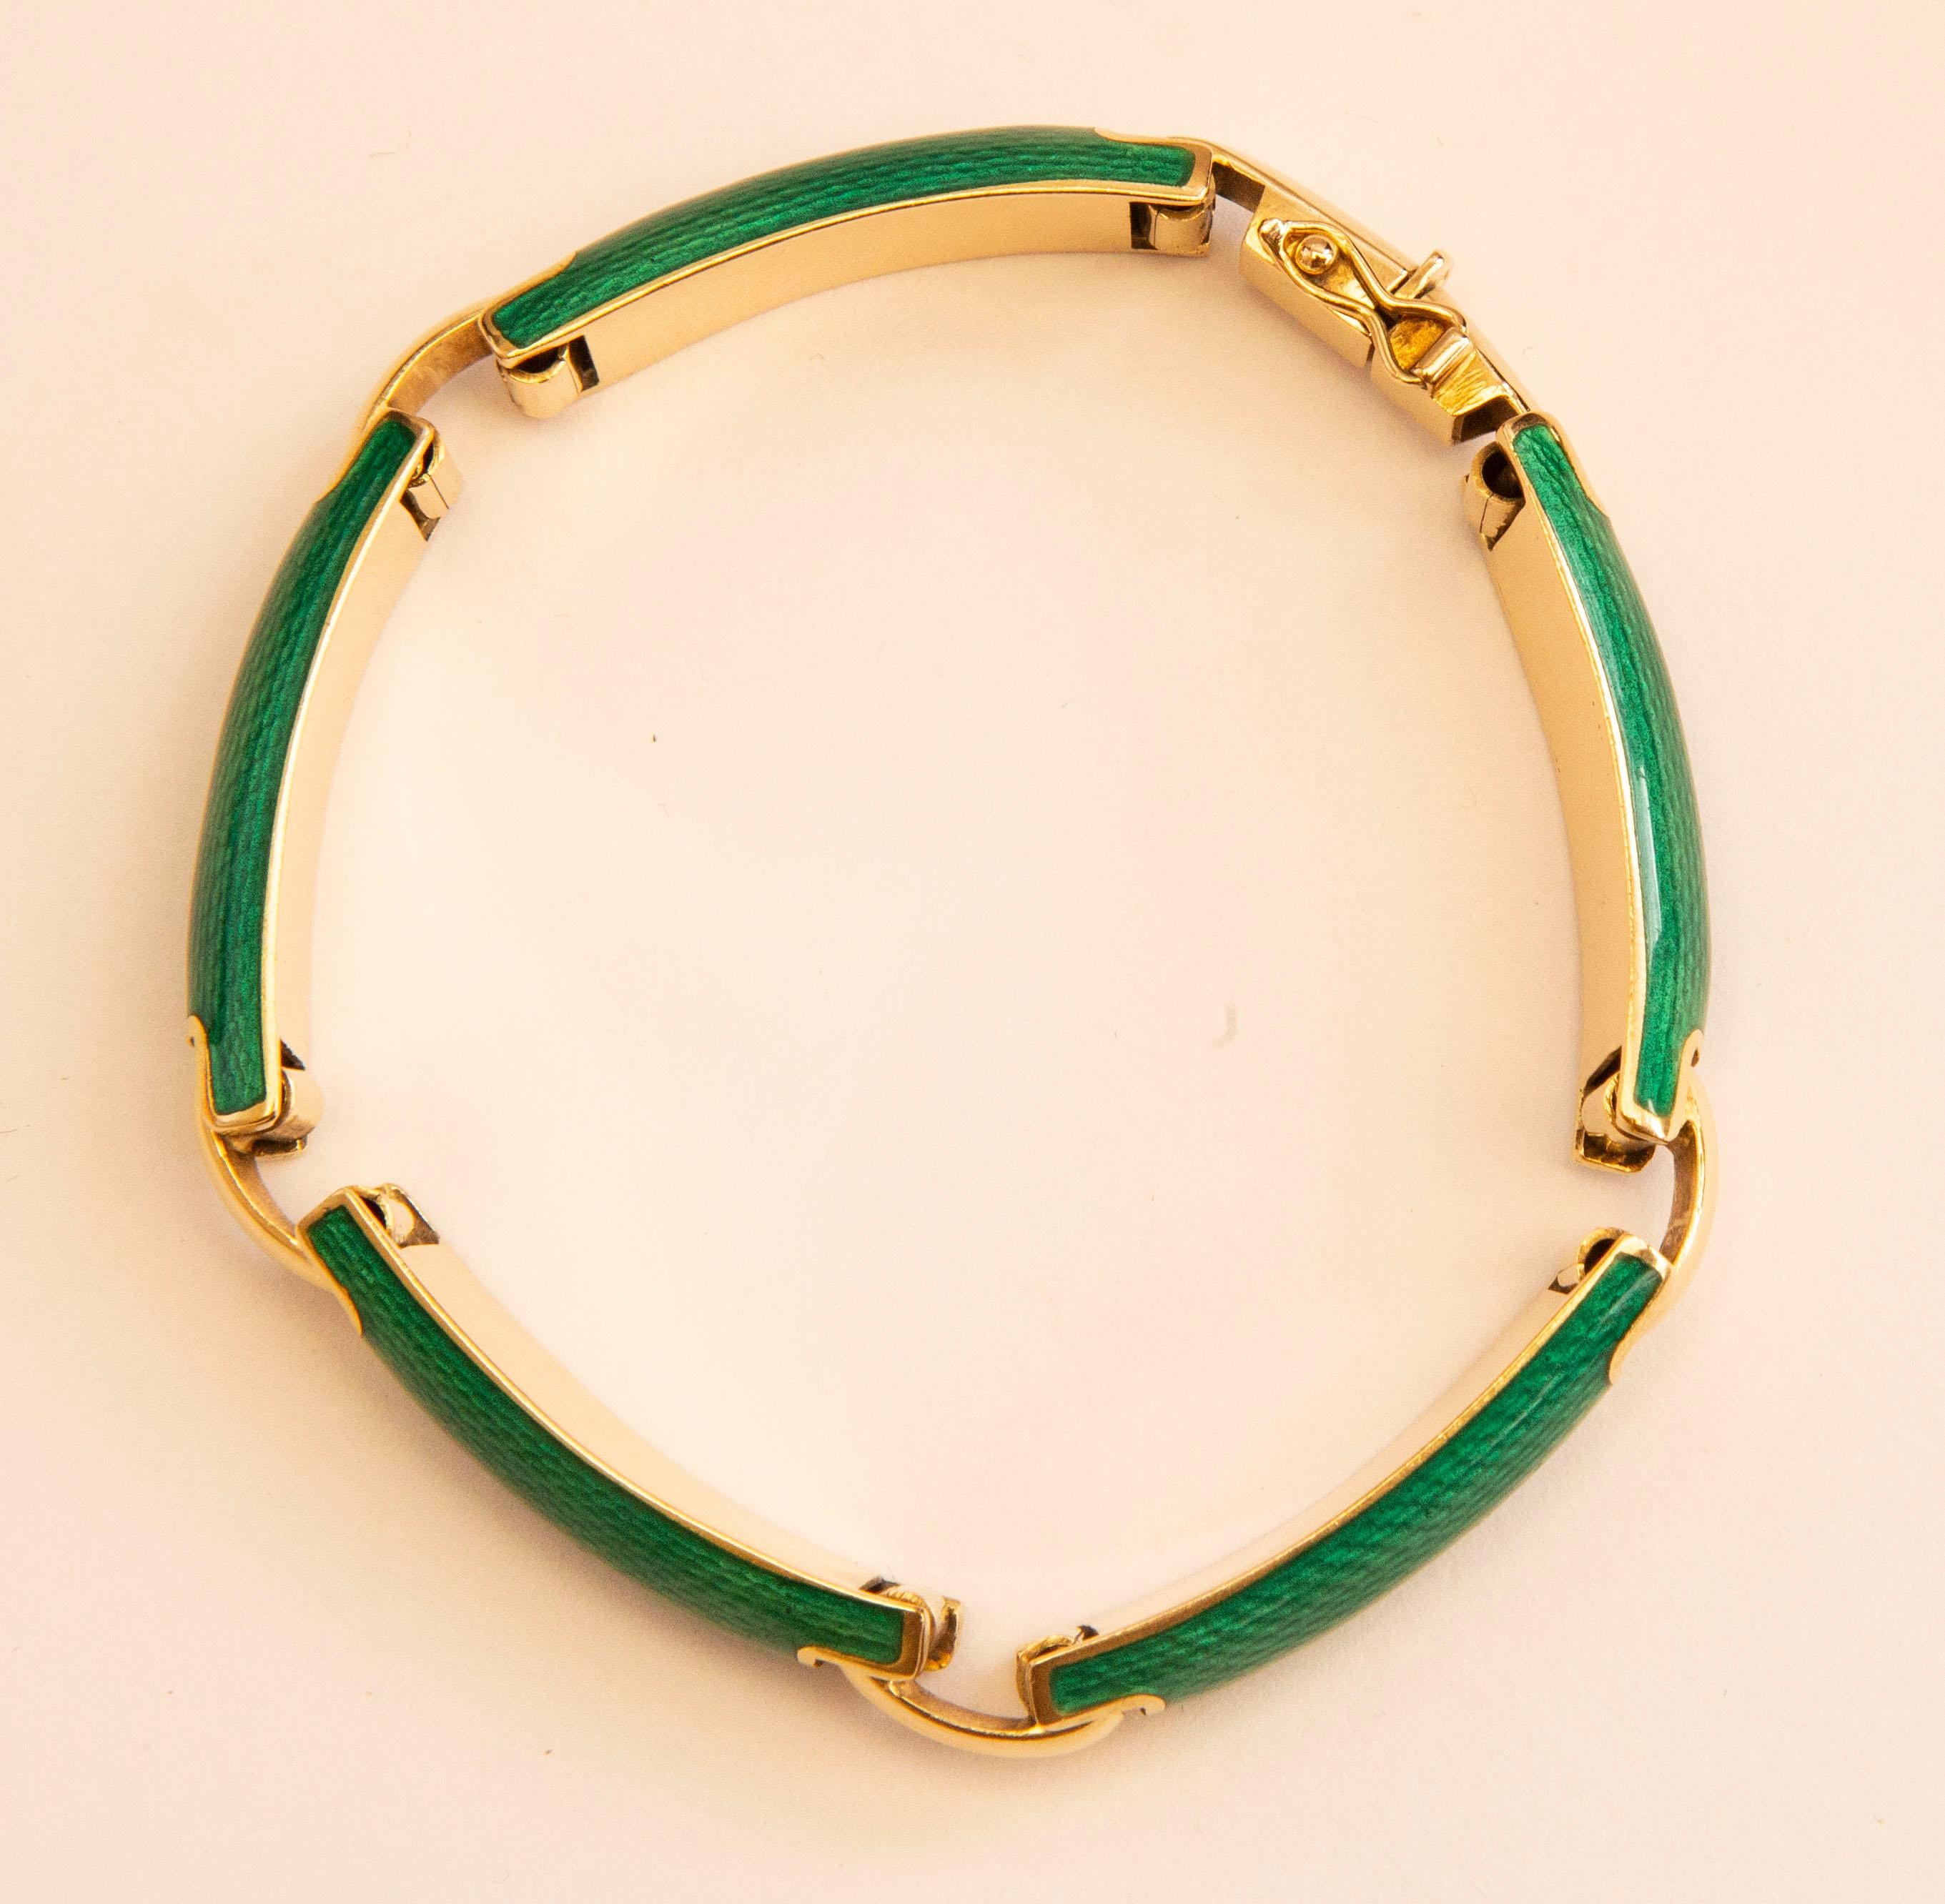 A vintage Italian 18 karat yellow gold bracelet with vibrant green enamel reptile print links. The links are connected with half moon shaped bars. It has an insert clasp and safety lock for your security.
The bracelet is marked with 750 standing for